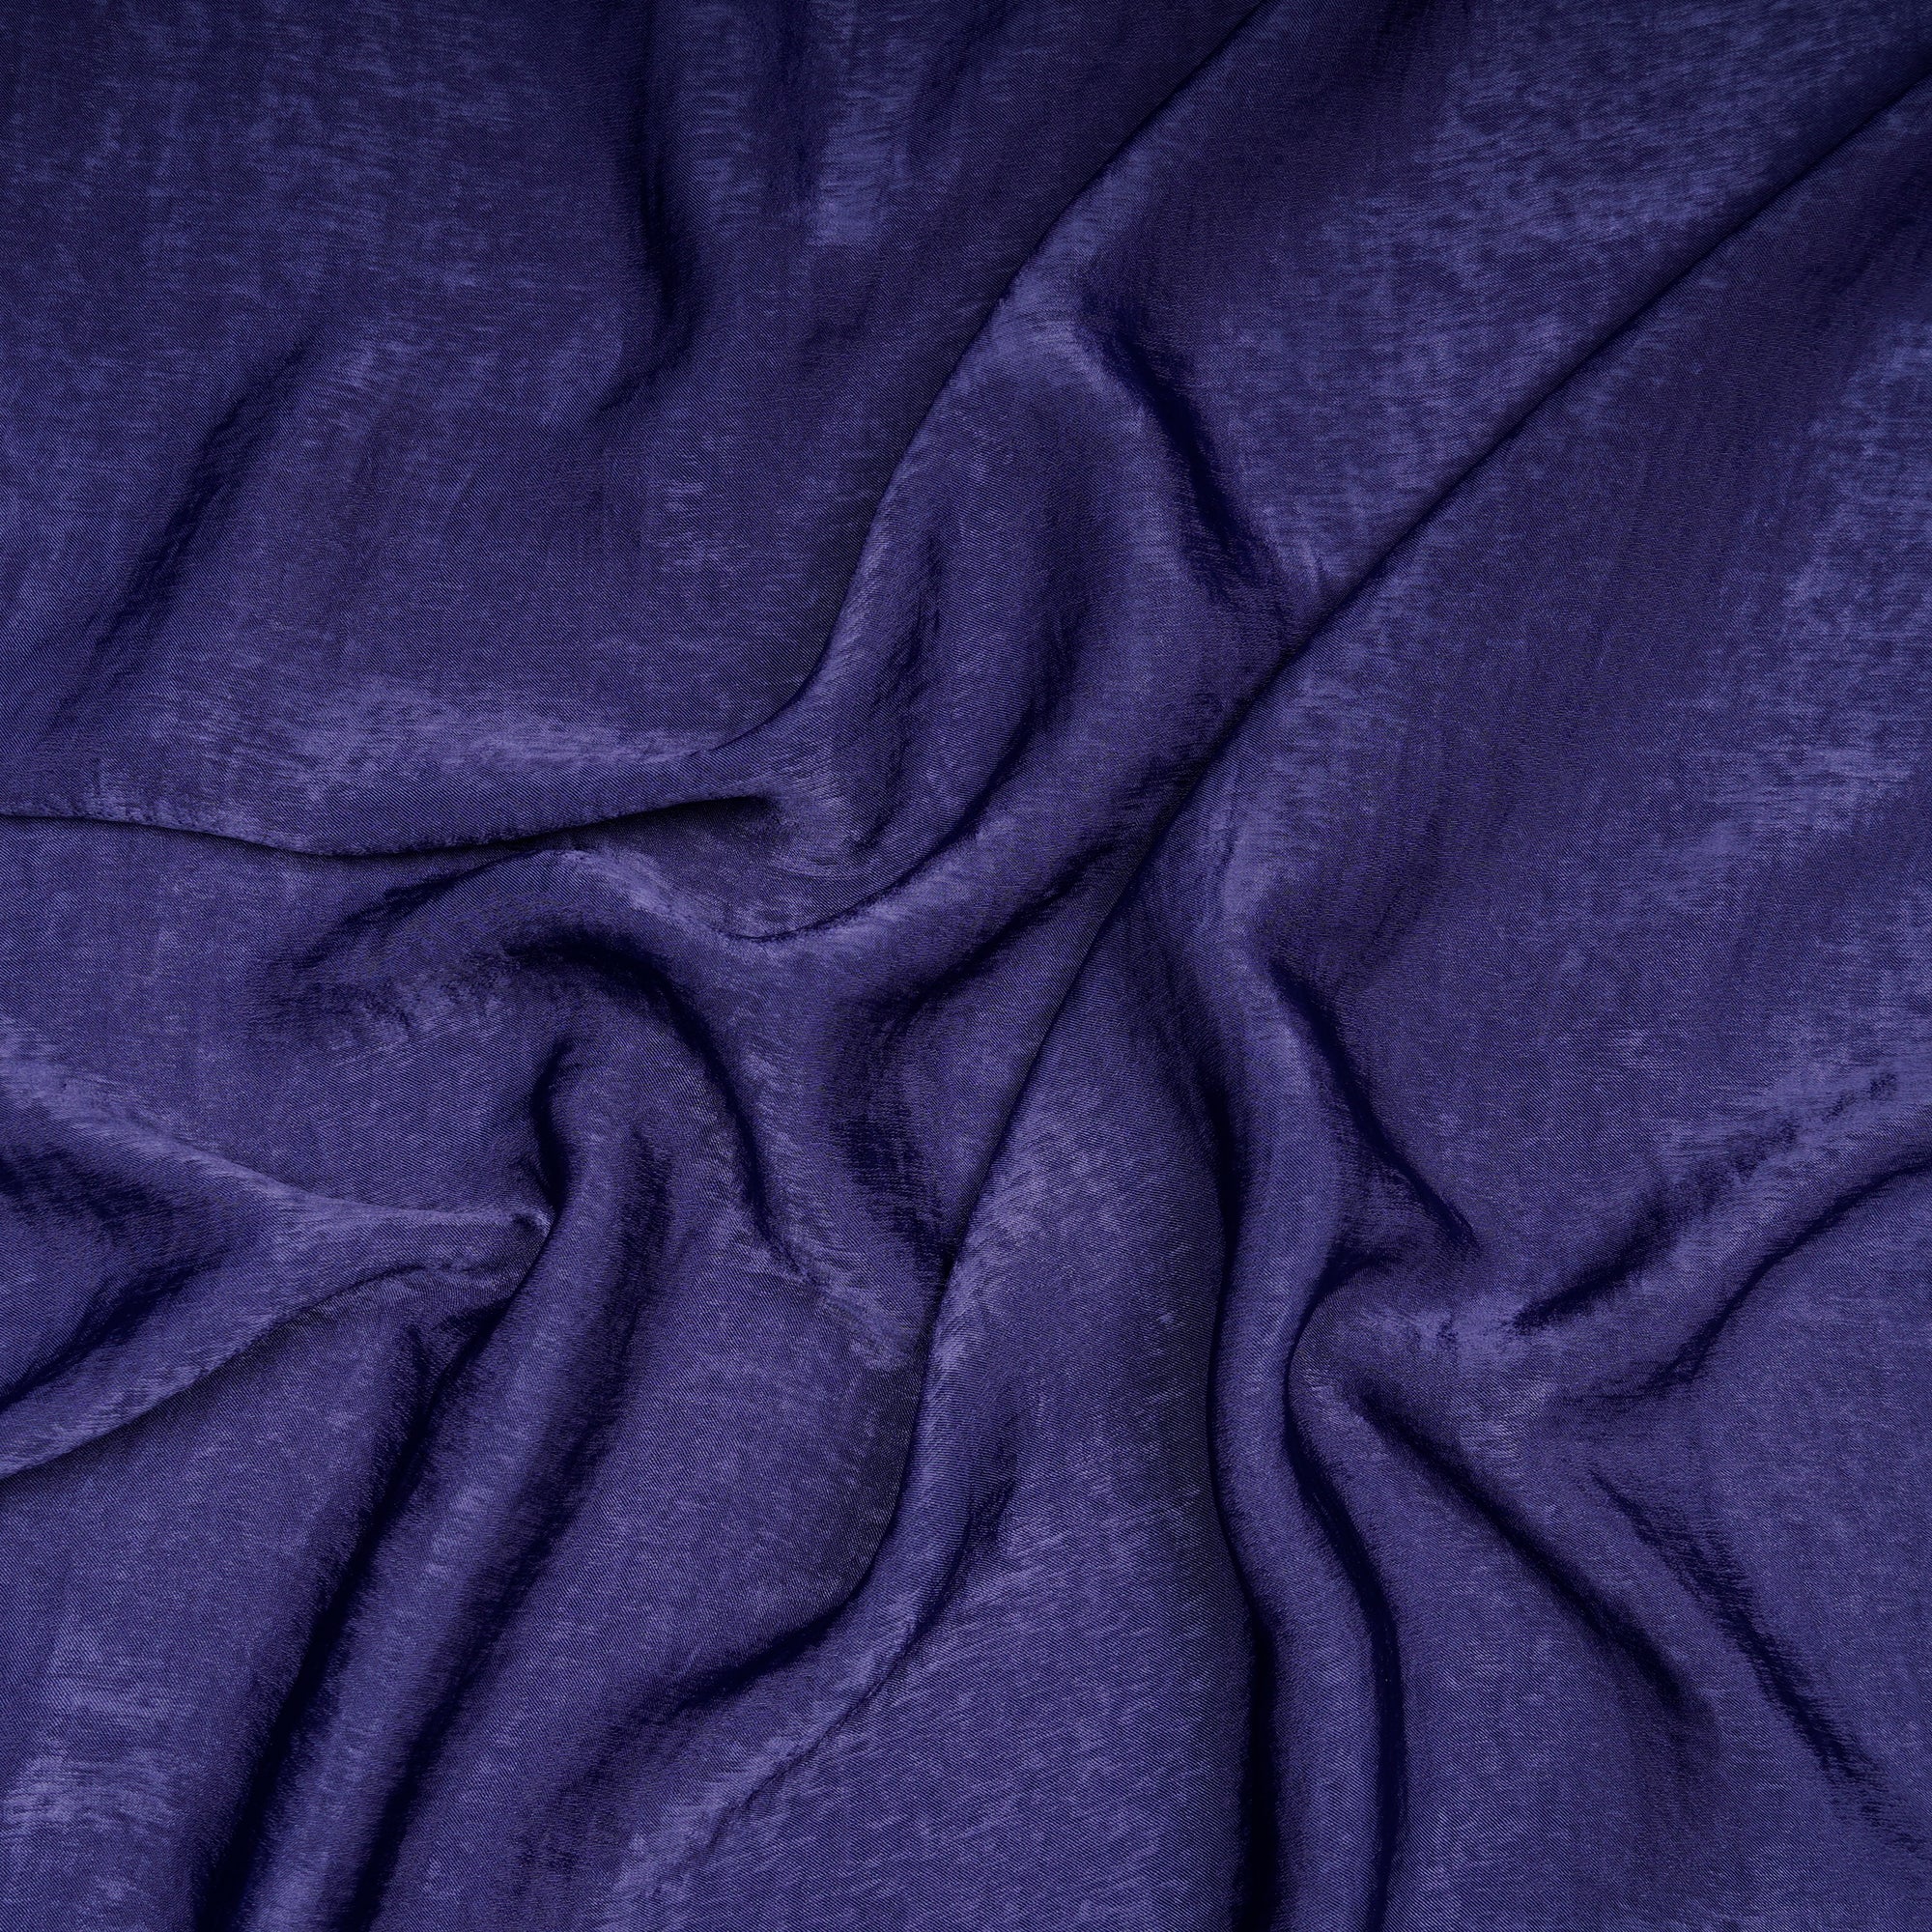 Voilet Solid Dyed Imported Sandwash Satin Fabric (60" Width)